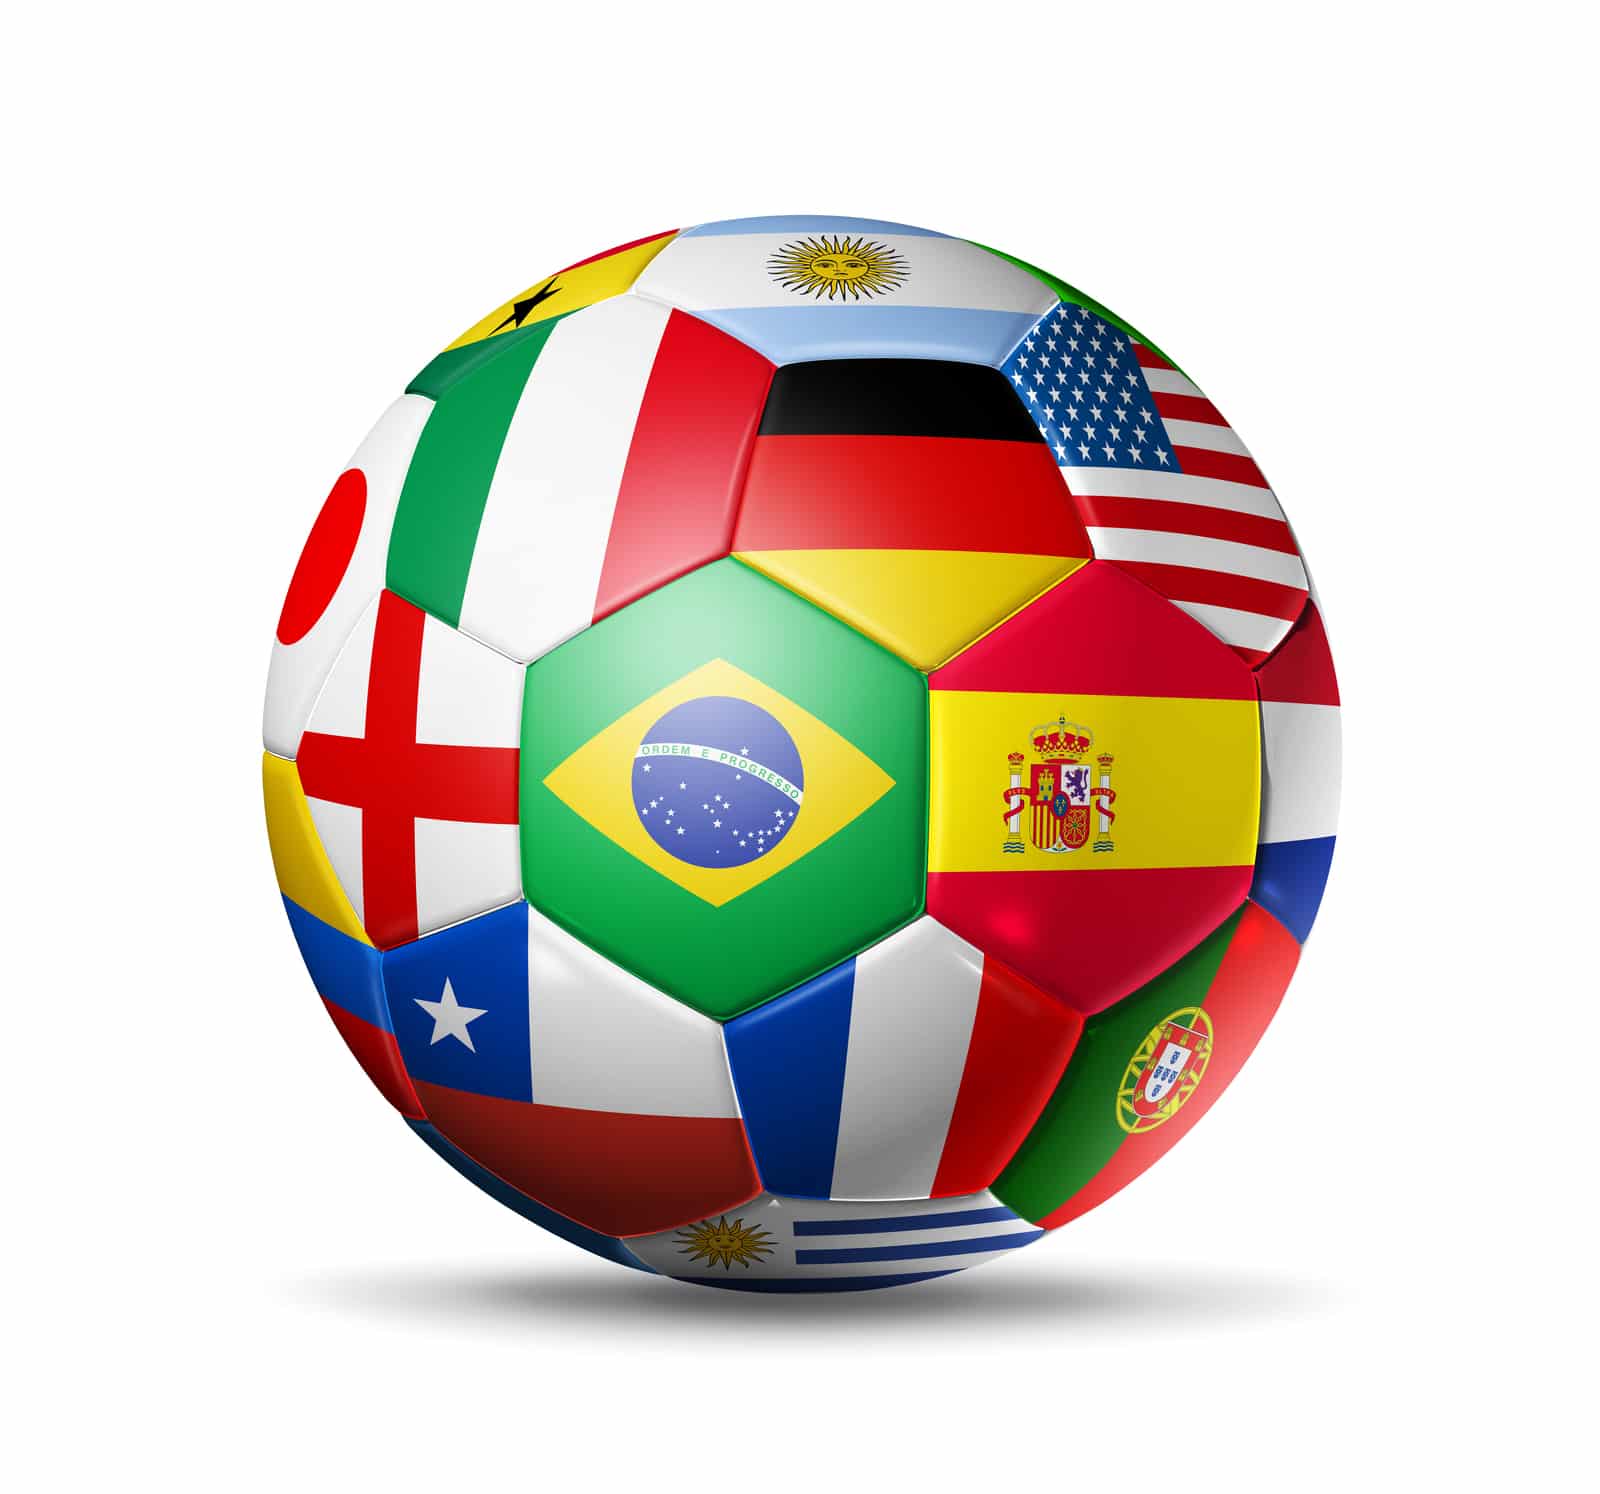 Finding Betting Sites For The World Cup And 5 Best World Cup Betting Sites